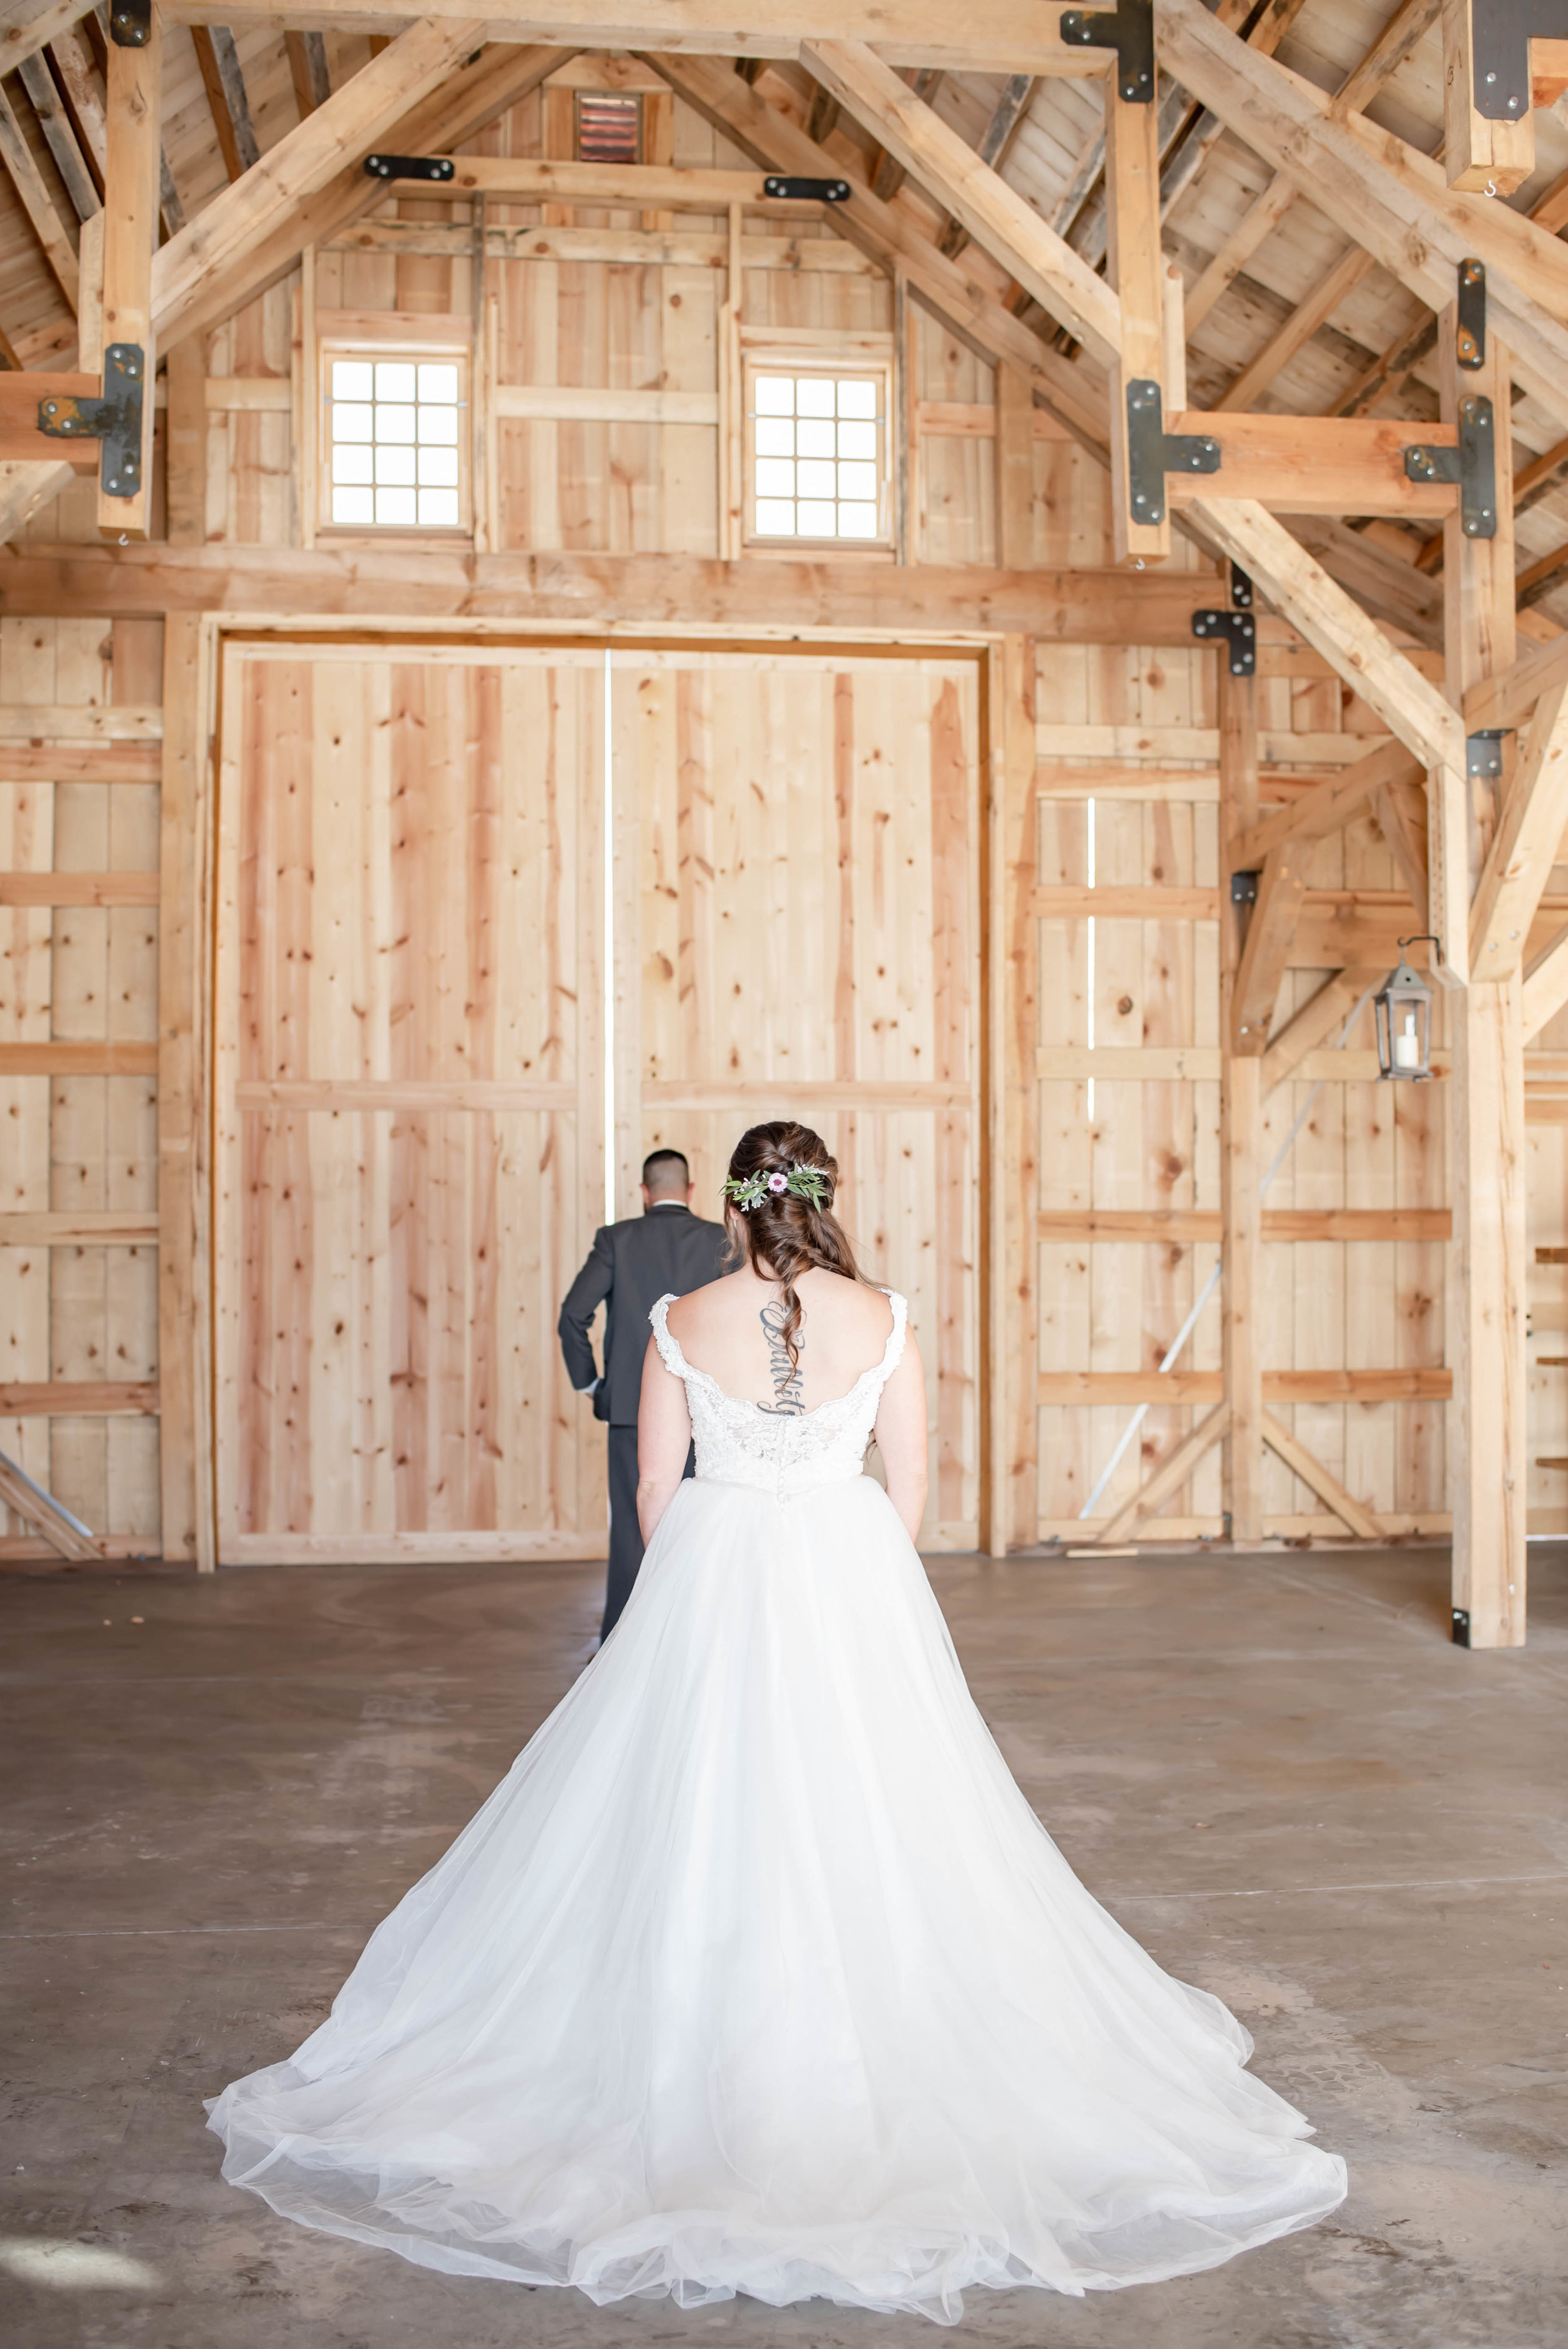 How to Dress for an English Country Barn Wedding